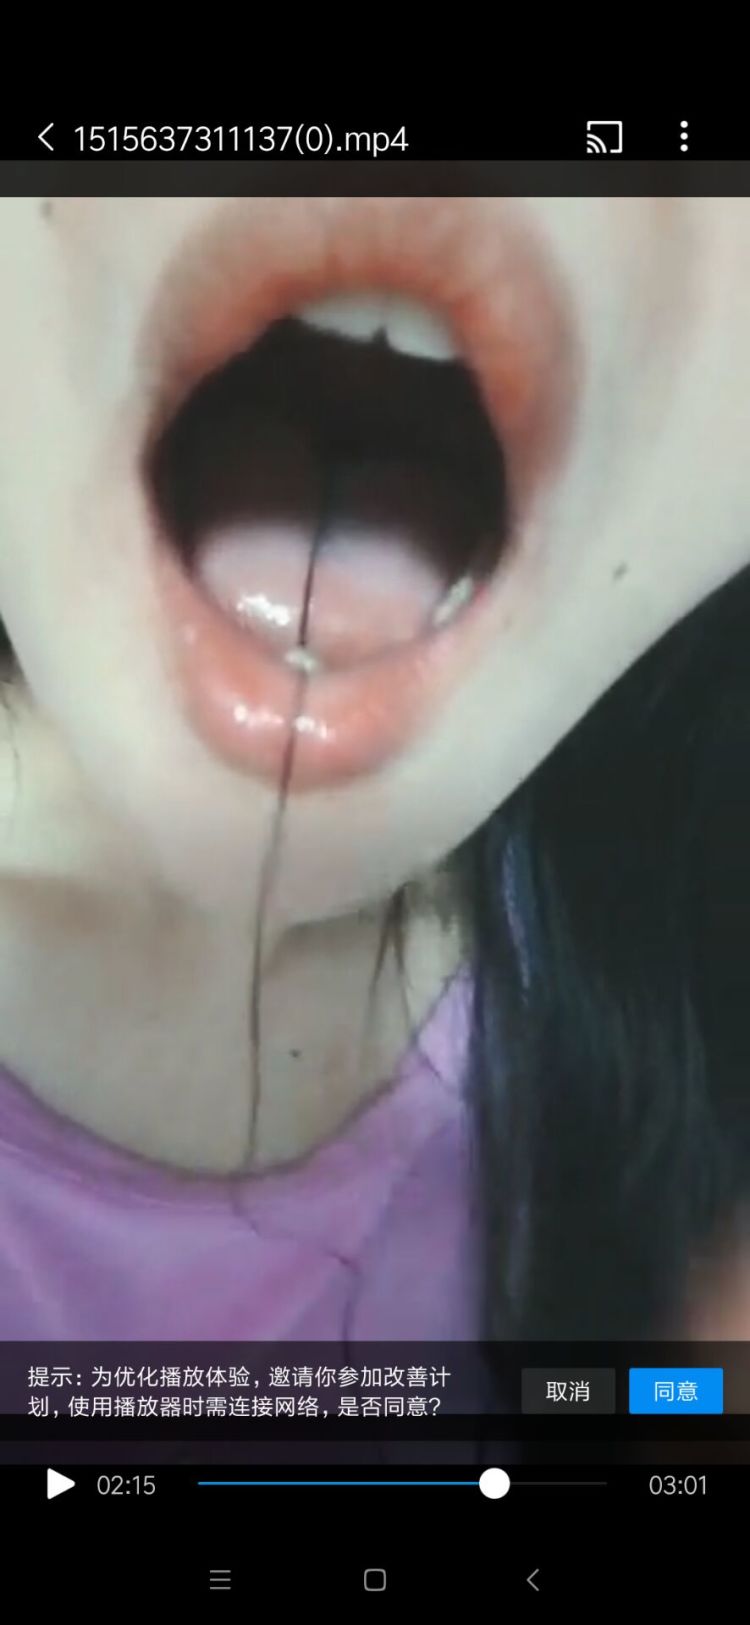 Swallow vore Chinese pic